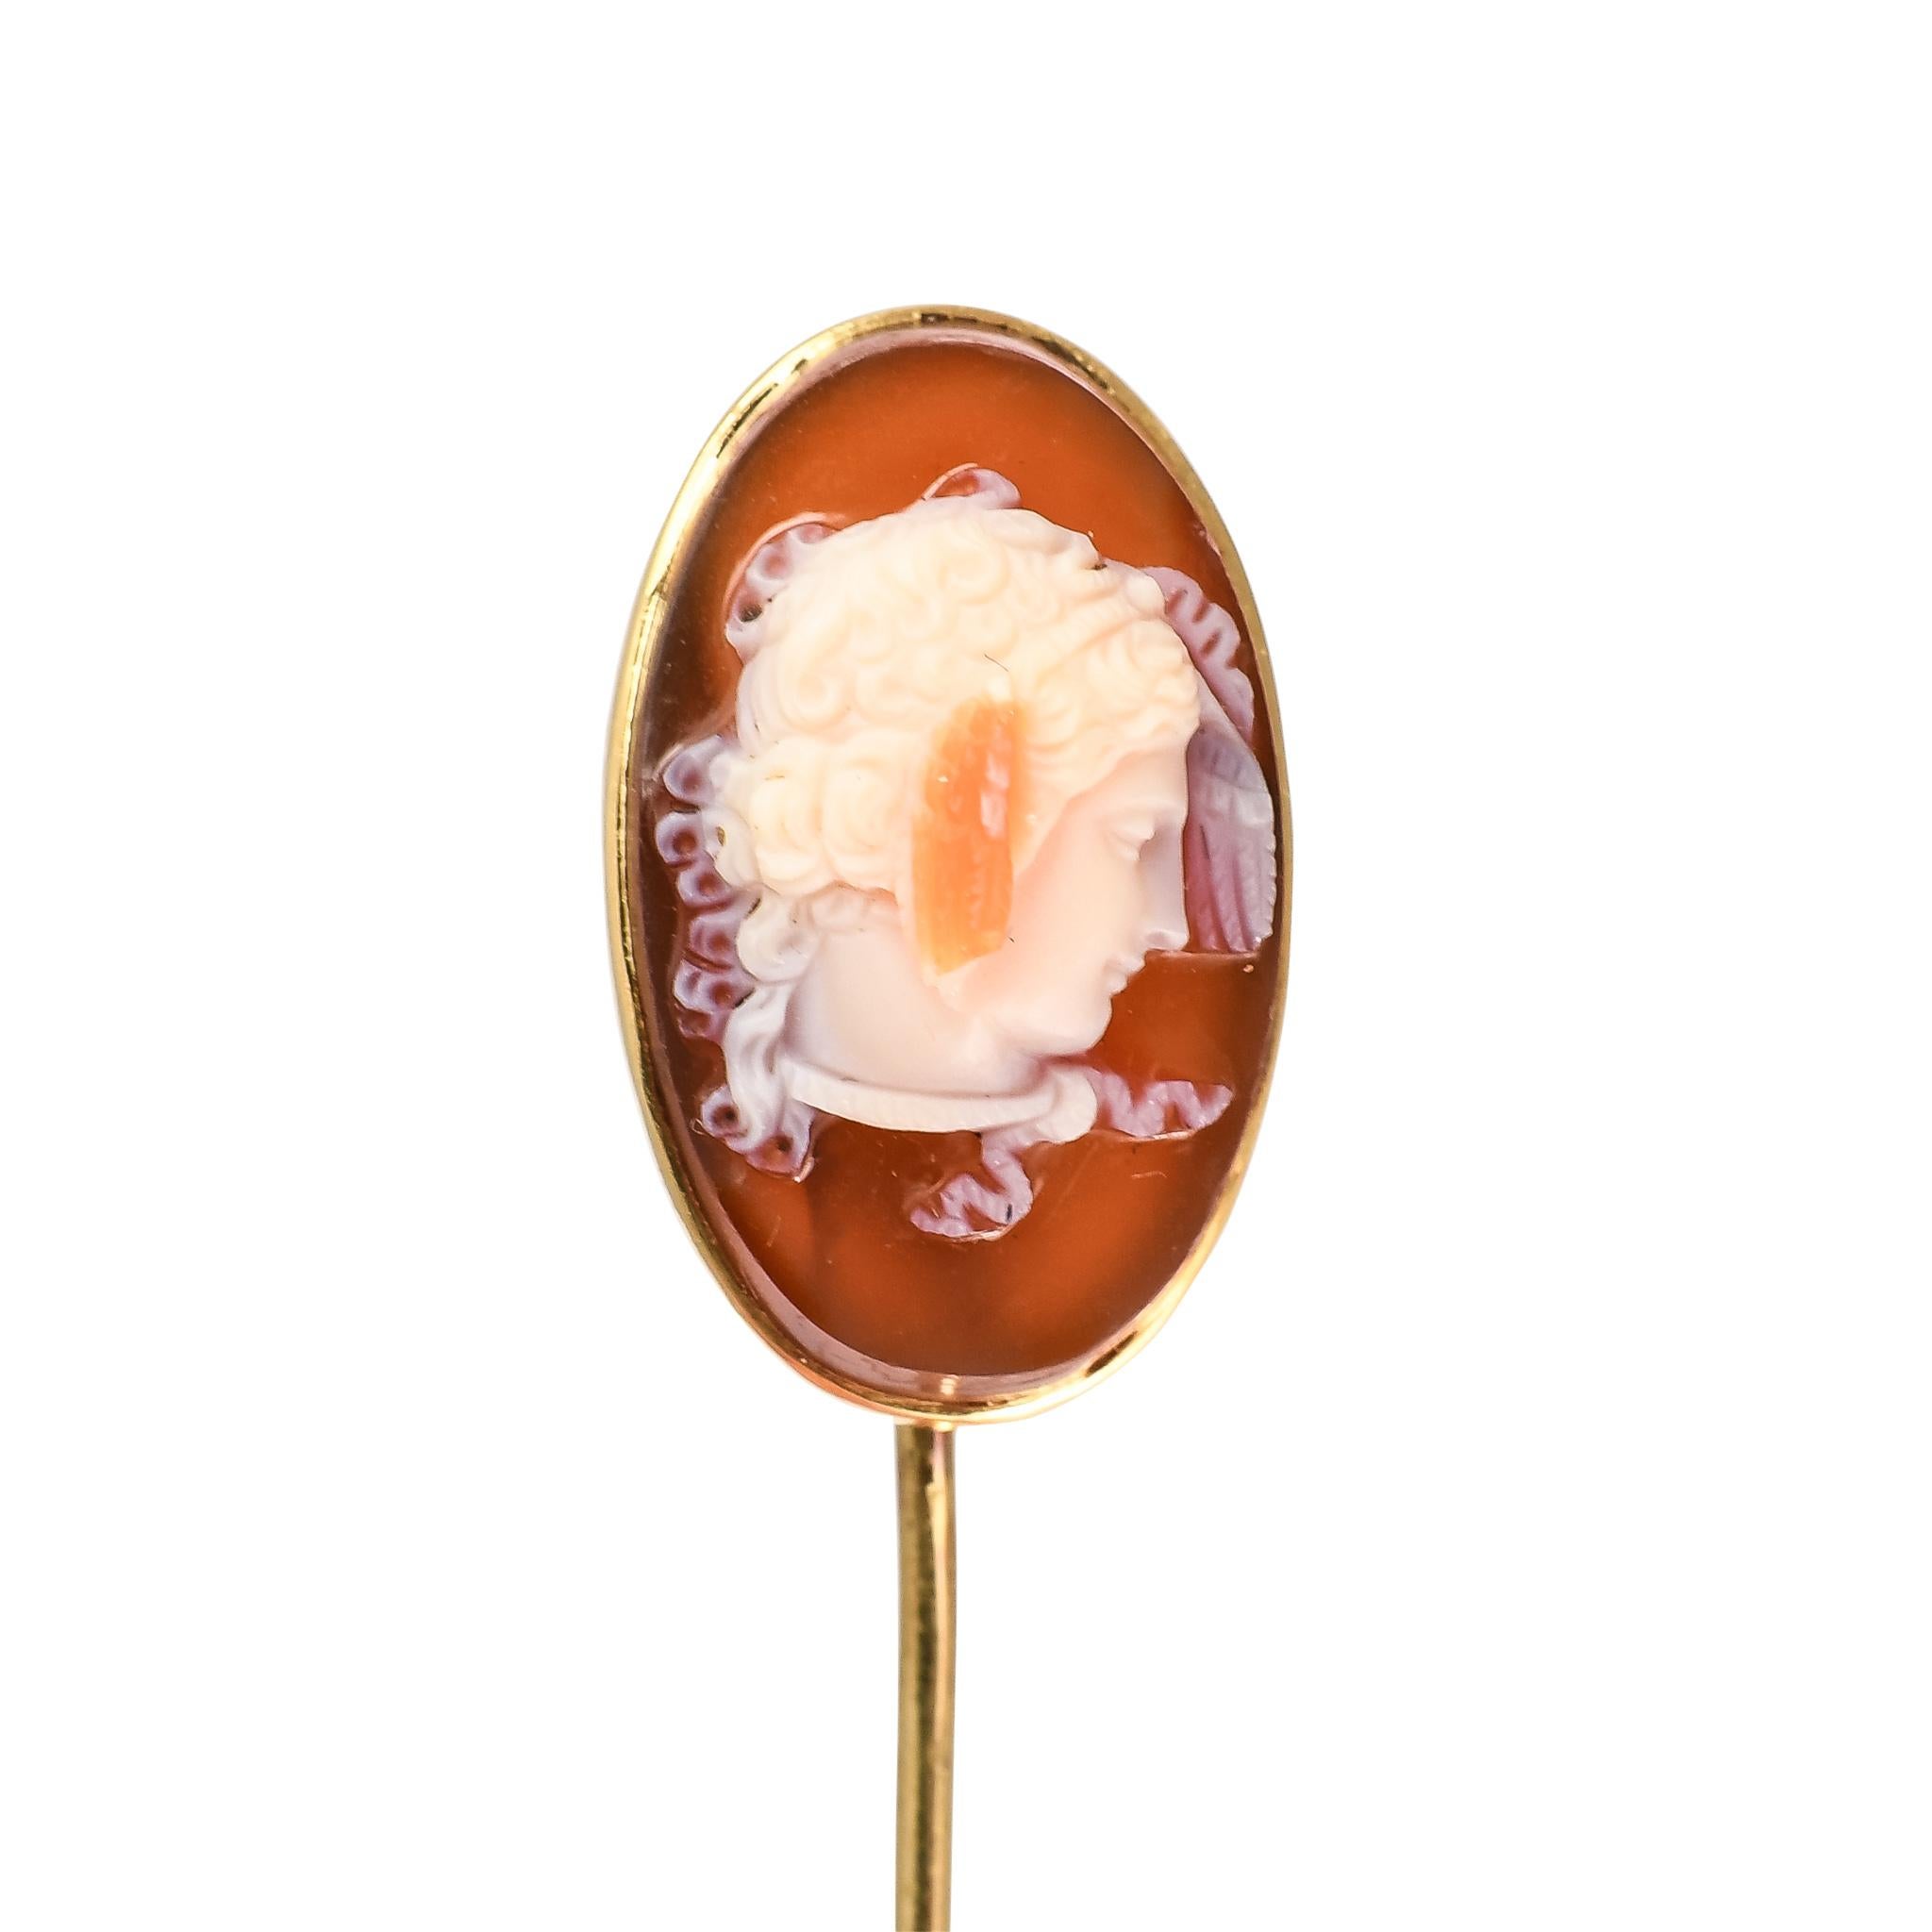 An incredible antique stick pin featuring an exceptionally well executed sardonyx cameo of Medusa the Gorgon. Depicted here as a winged head, with striking beauty, and a snake knotted around her neck - the level of detail is extraordinary, and the